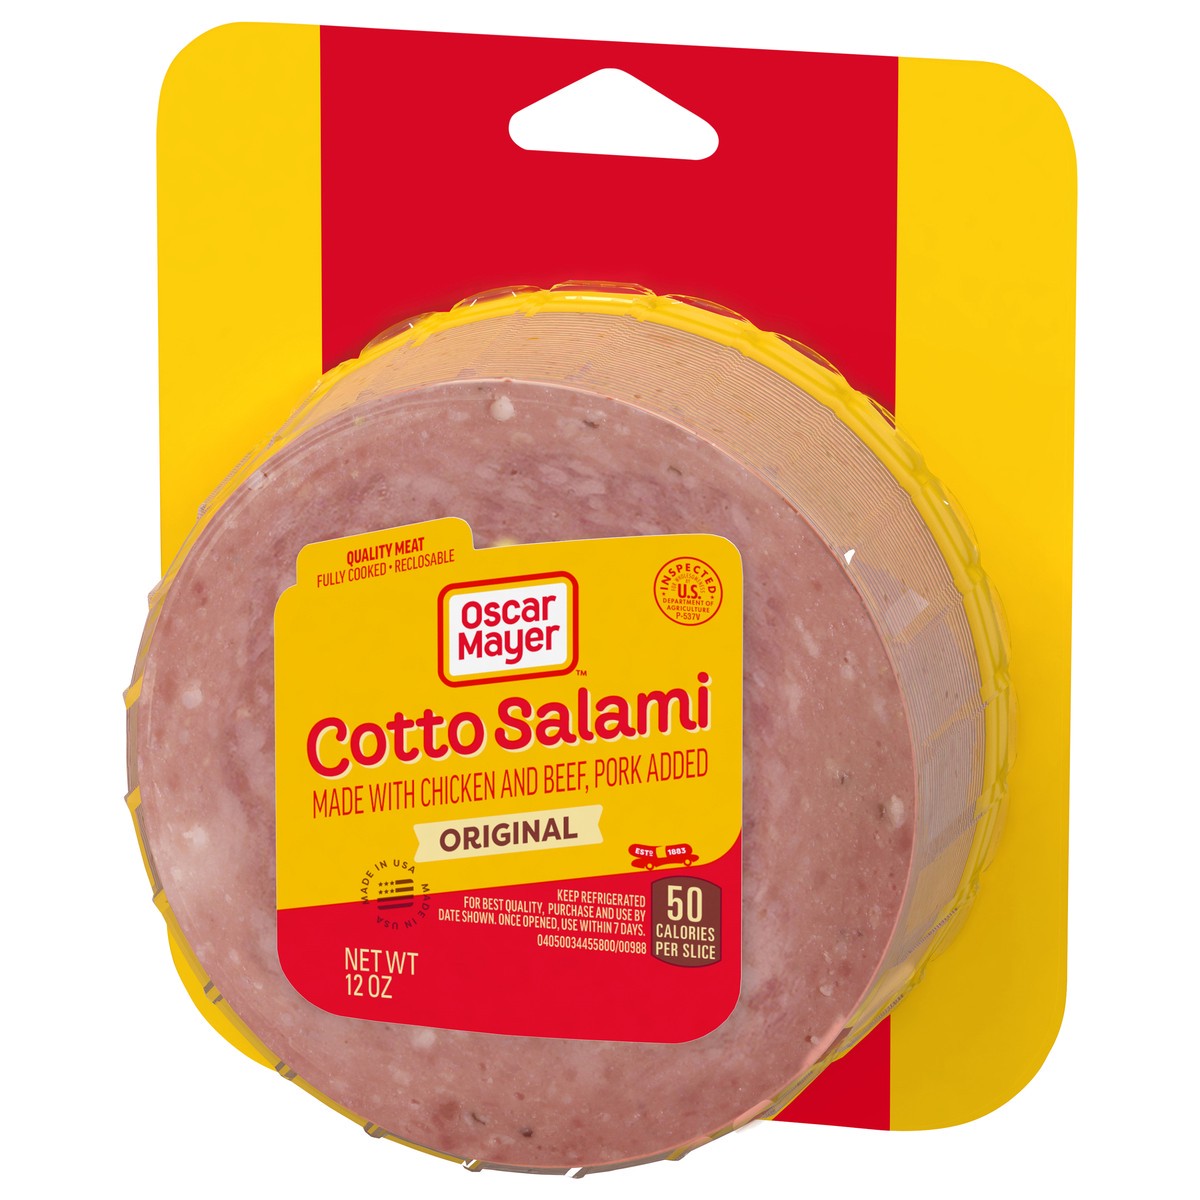 slide 9 of 9, Oscar Mayer Cotto Salami Made with Chicken And Beef, Pork Added Sliced Lunch Meat, 12 oz. Pack, 12 oz